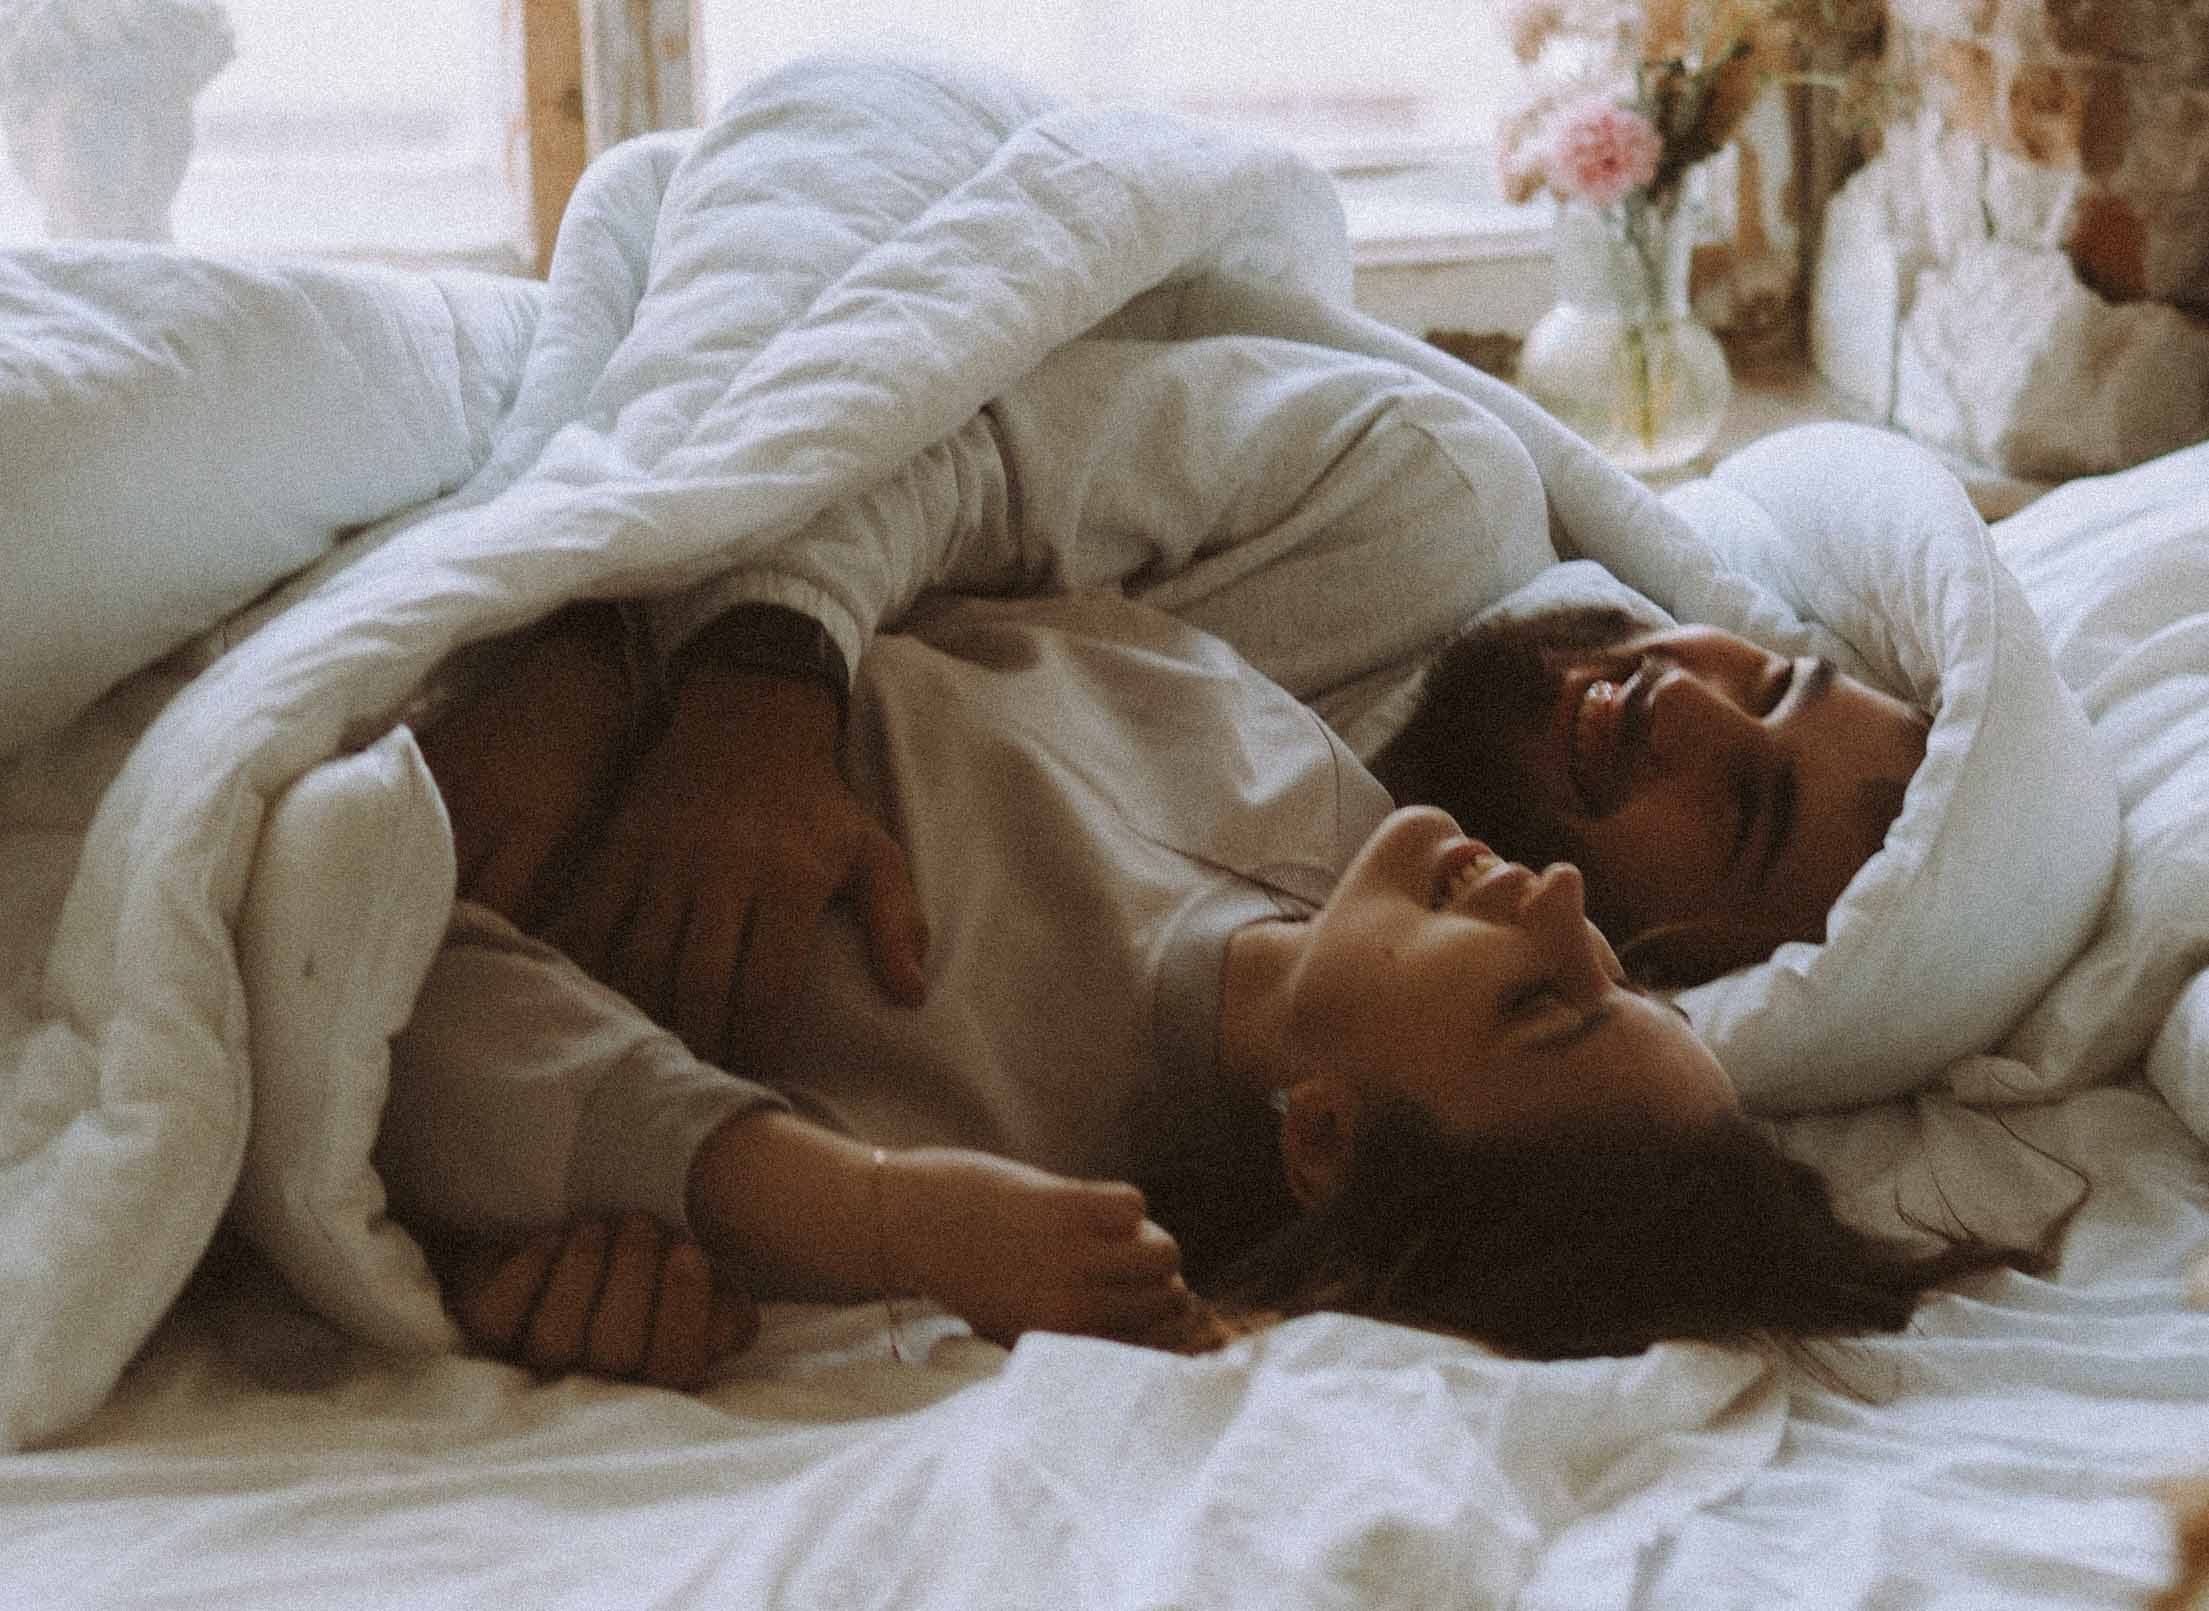 embrace your sexuality like this couple cuddling in bed